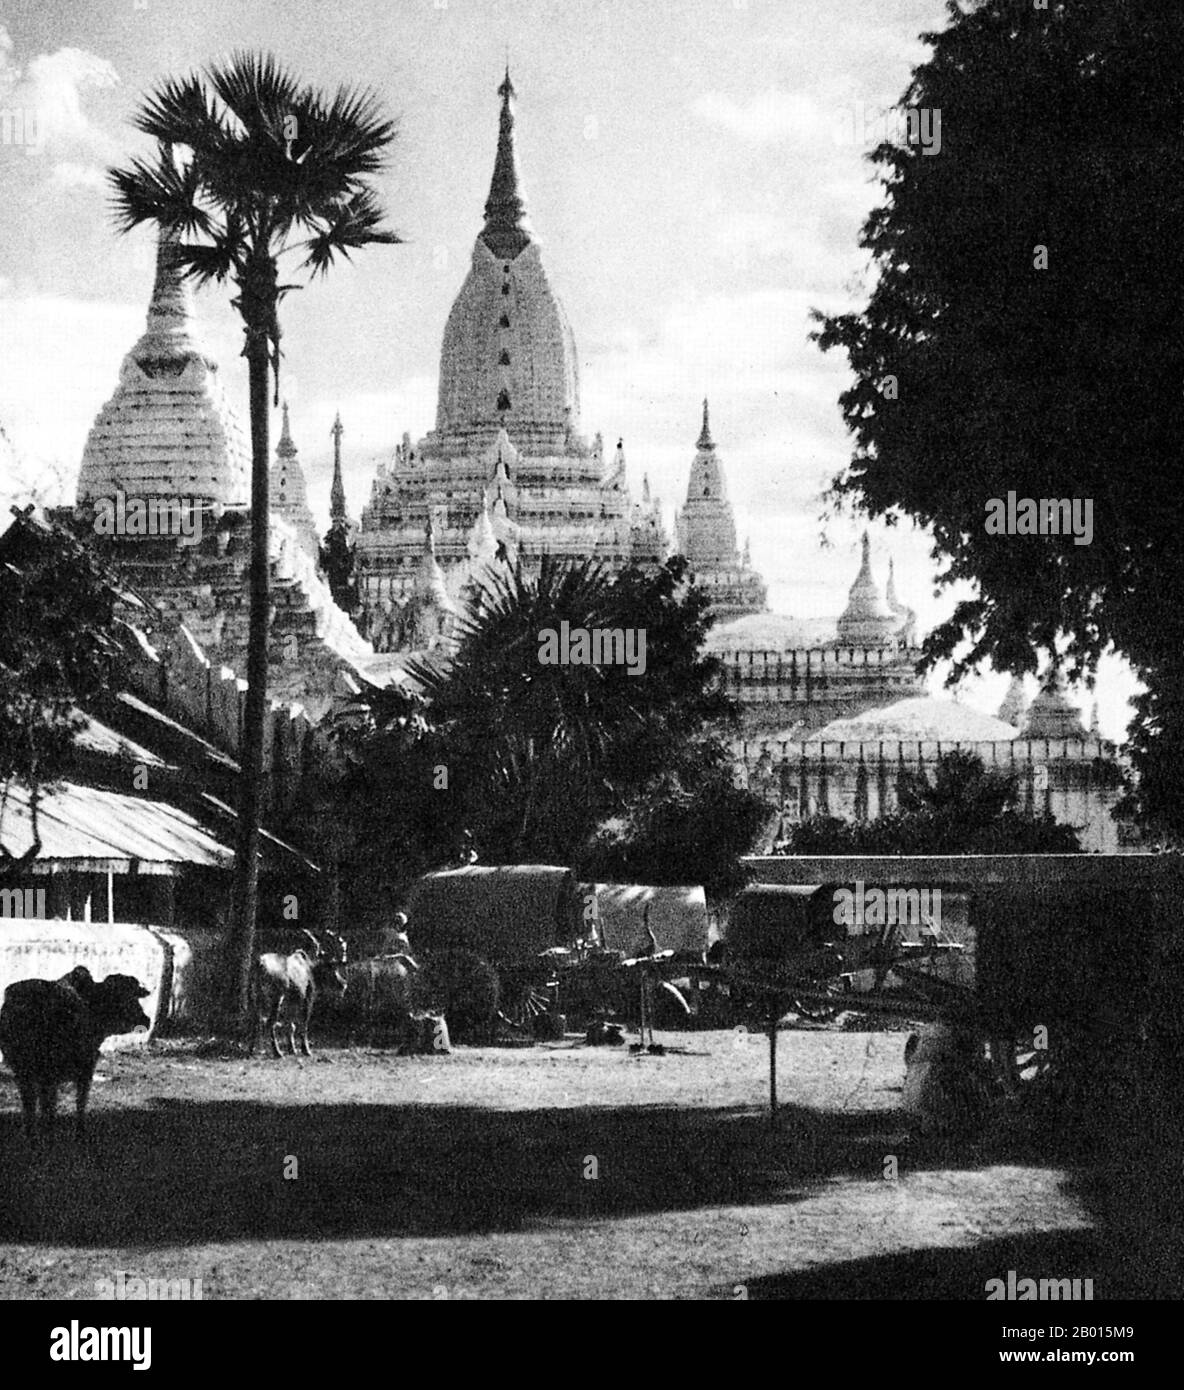 Burma/Myanmar: The Ananda Pagoda in Bagan, Upper Burma, c. 1920s.  Perhaps the highest revered temple in Bagan, the Ananda Pagoda was built in 1105 AD during the reign of King Kyanzittha (1084–1113) of the Bagan Dynasty. It is one of four surviving original temples of Bagan (also called Pagan). The temple layout is in a cruciform with several terraces leading to a small pagoda at the top covered by an umbrella (‘hti’).  The Buddhist temple houses four standing Buddhas—facing east, north, west and south. The temple is an architectural wonder with a fusion of Mon and adopted Indian styles. Stock Photo